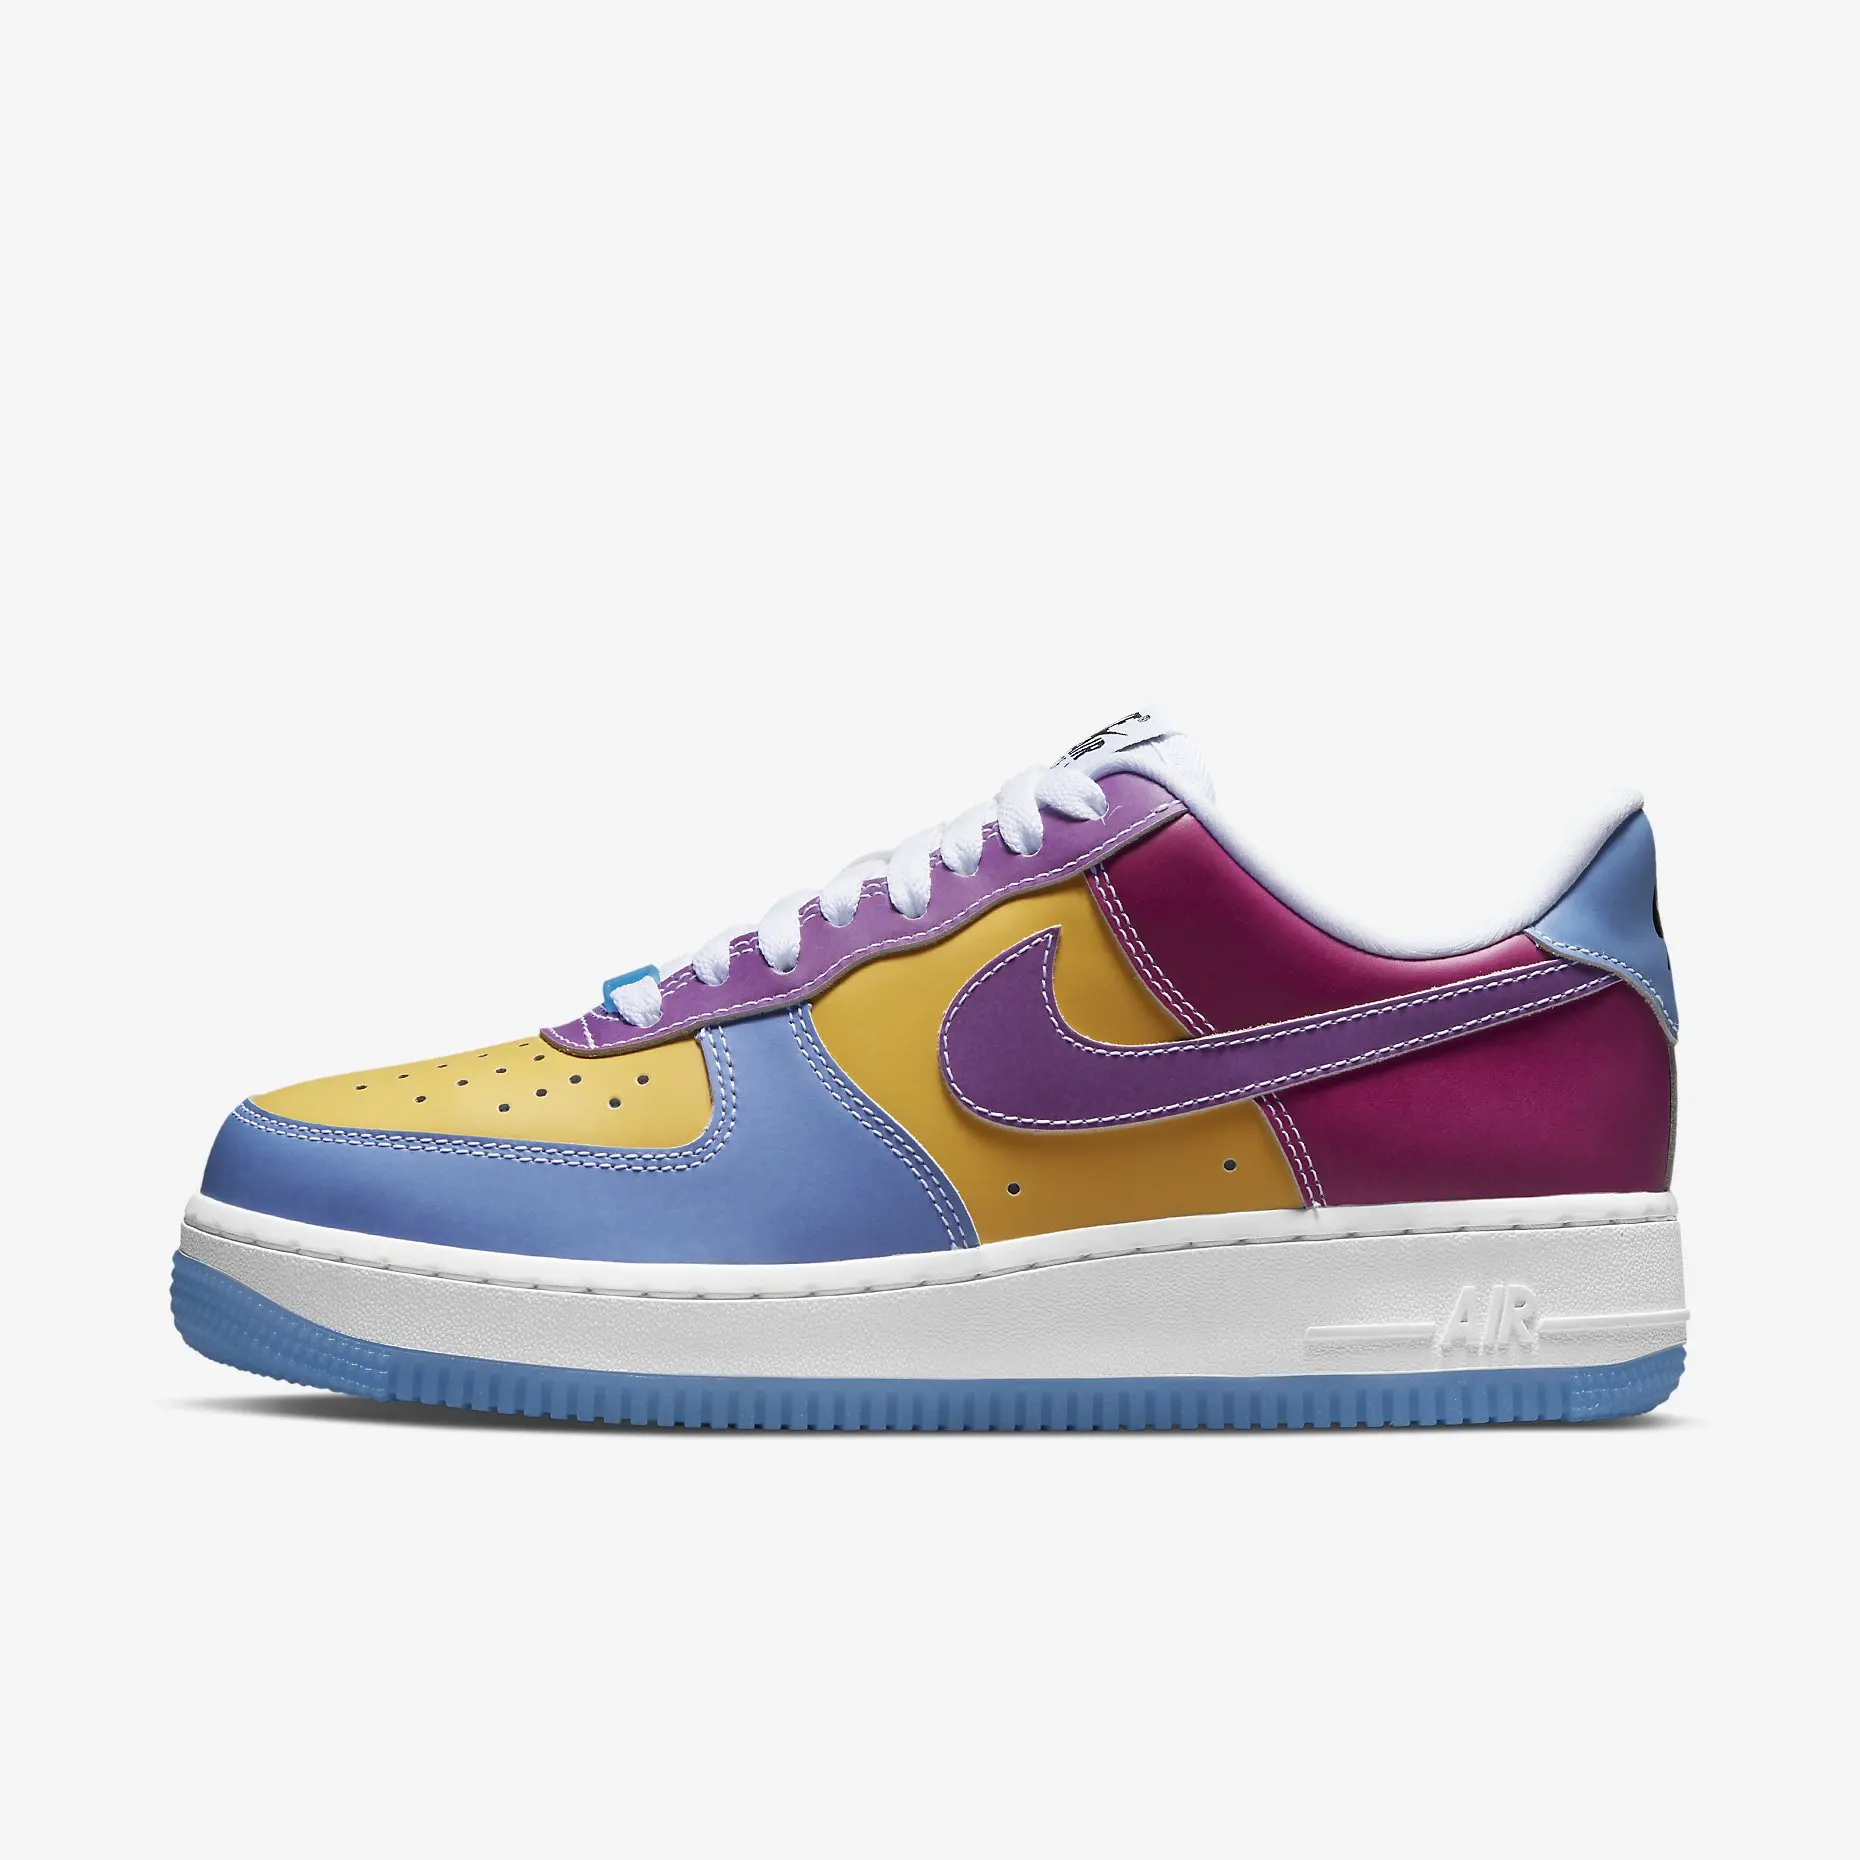 Nike Air Force 1 Photochromic UV Color Change Shoes for Women